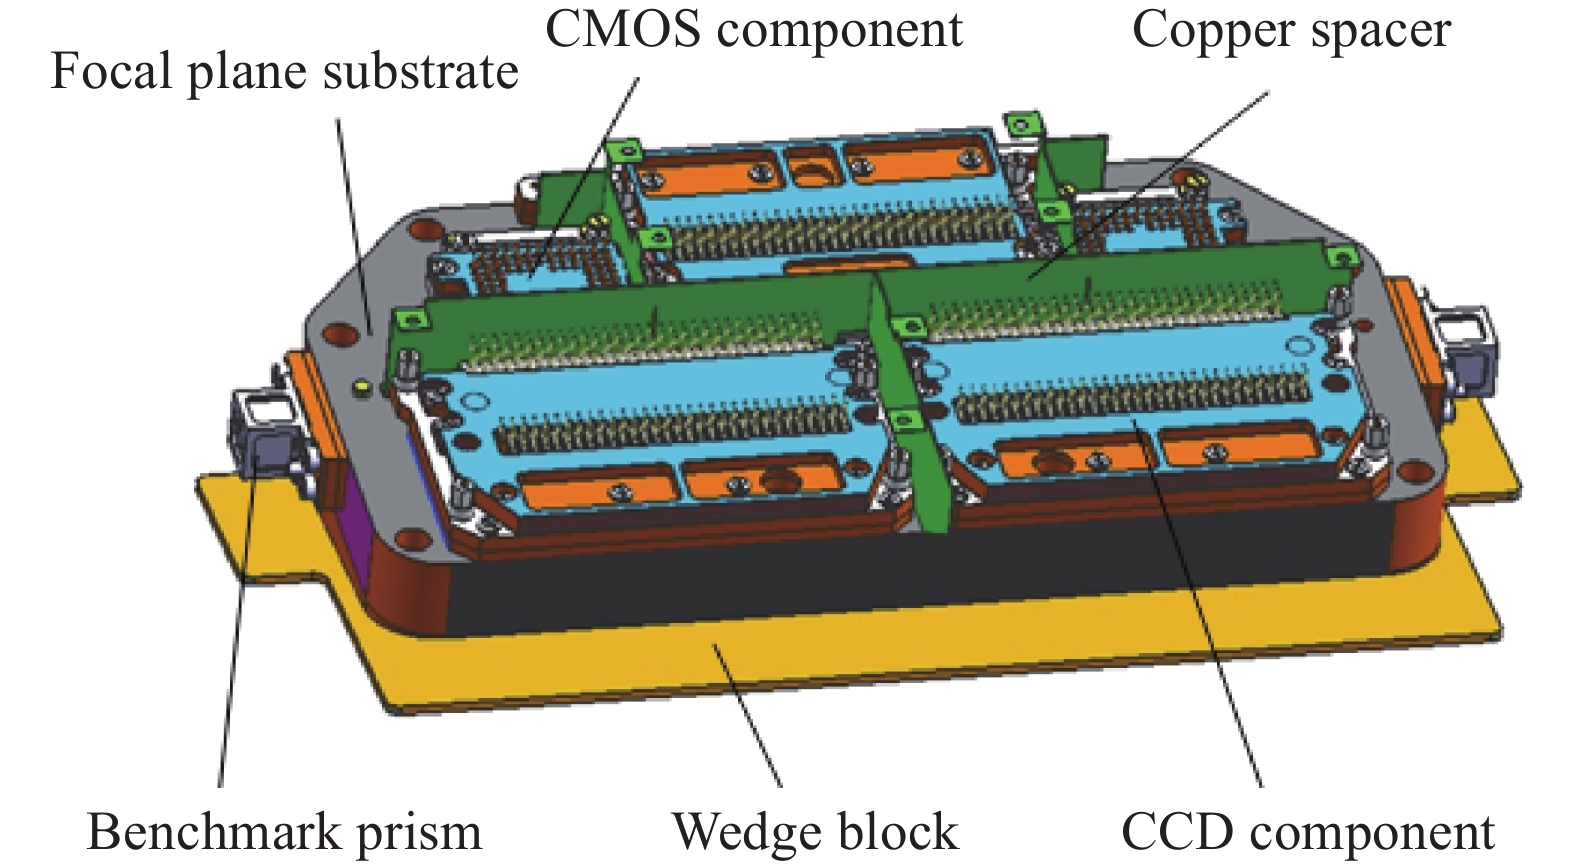 Structure layout of focal plane component(circuit board removed)